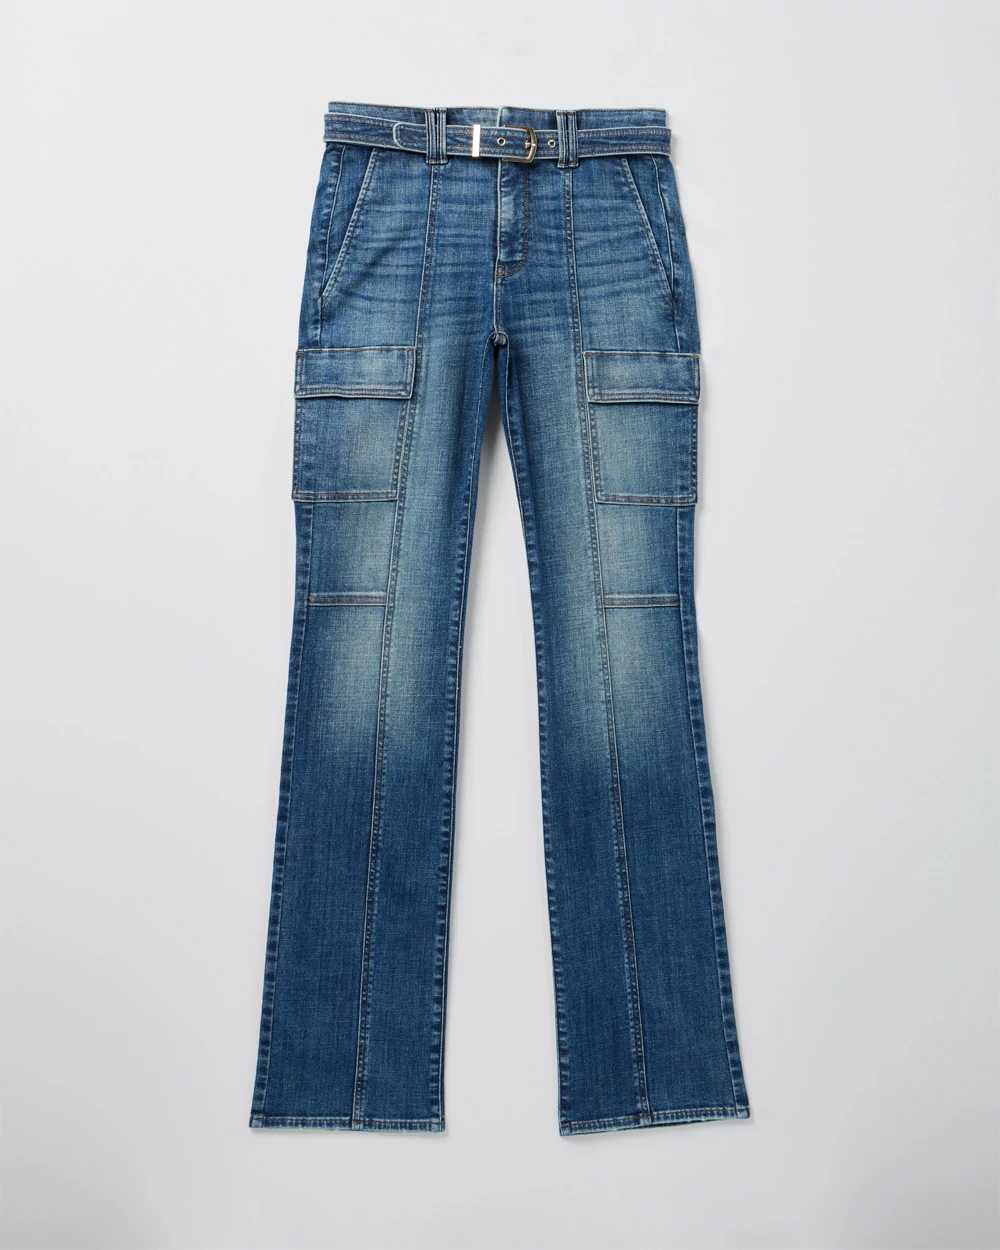 High-Rise Cargo Bootcut Jeans click to view larger image.